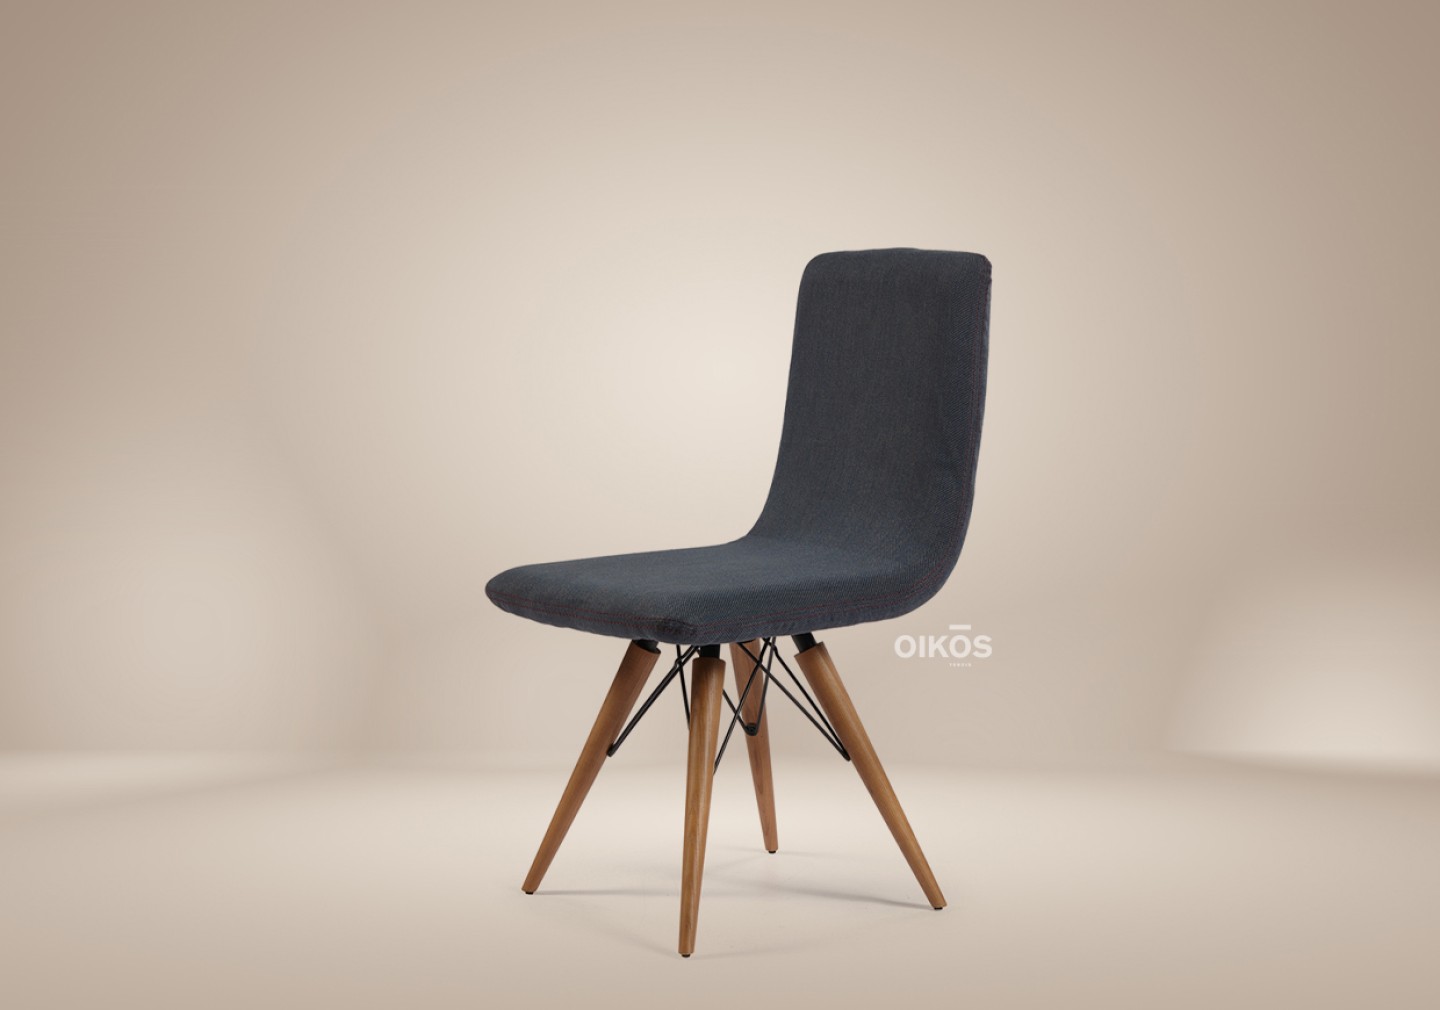 THE NEW DHAKA DINING CHAIR